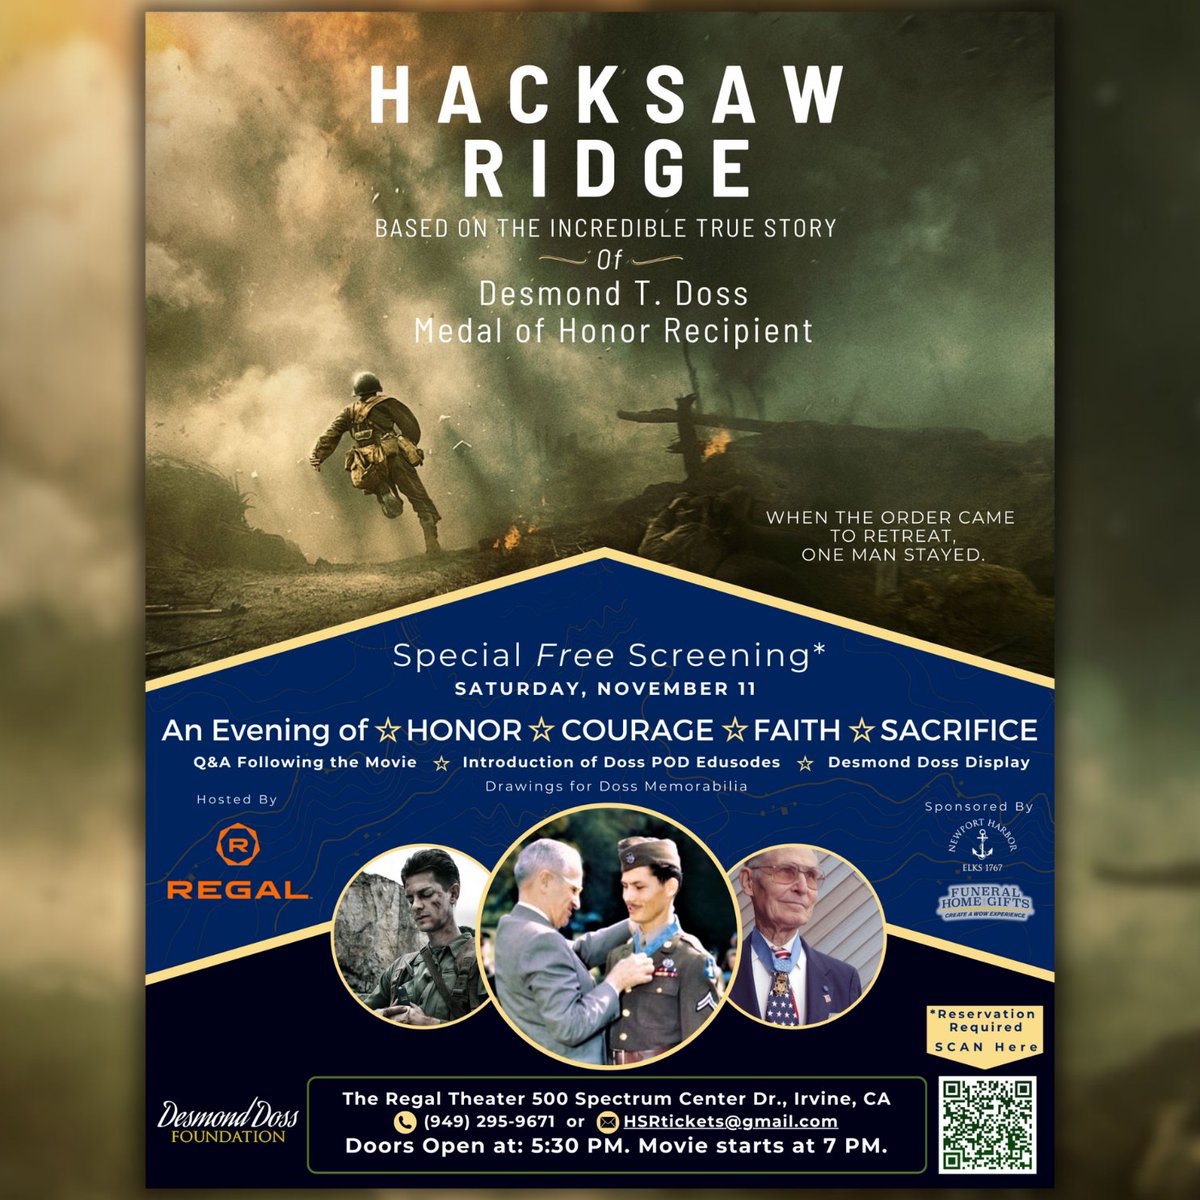 Please join for Hacksaw Ridge: Special Veterans Day Showing in Irvine, California. Reservation required. Please scan QR code or register👉bit.ly/Elks_DesmondDo…

#VeteransDay #HacksawRidge #WWII #MOH #LiveLikeDoss #JustOneMore #ConscientiousObjector #MelGibson #AndrewGarfield